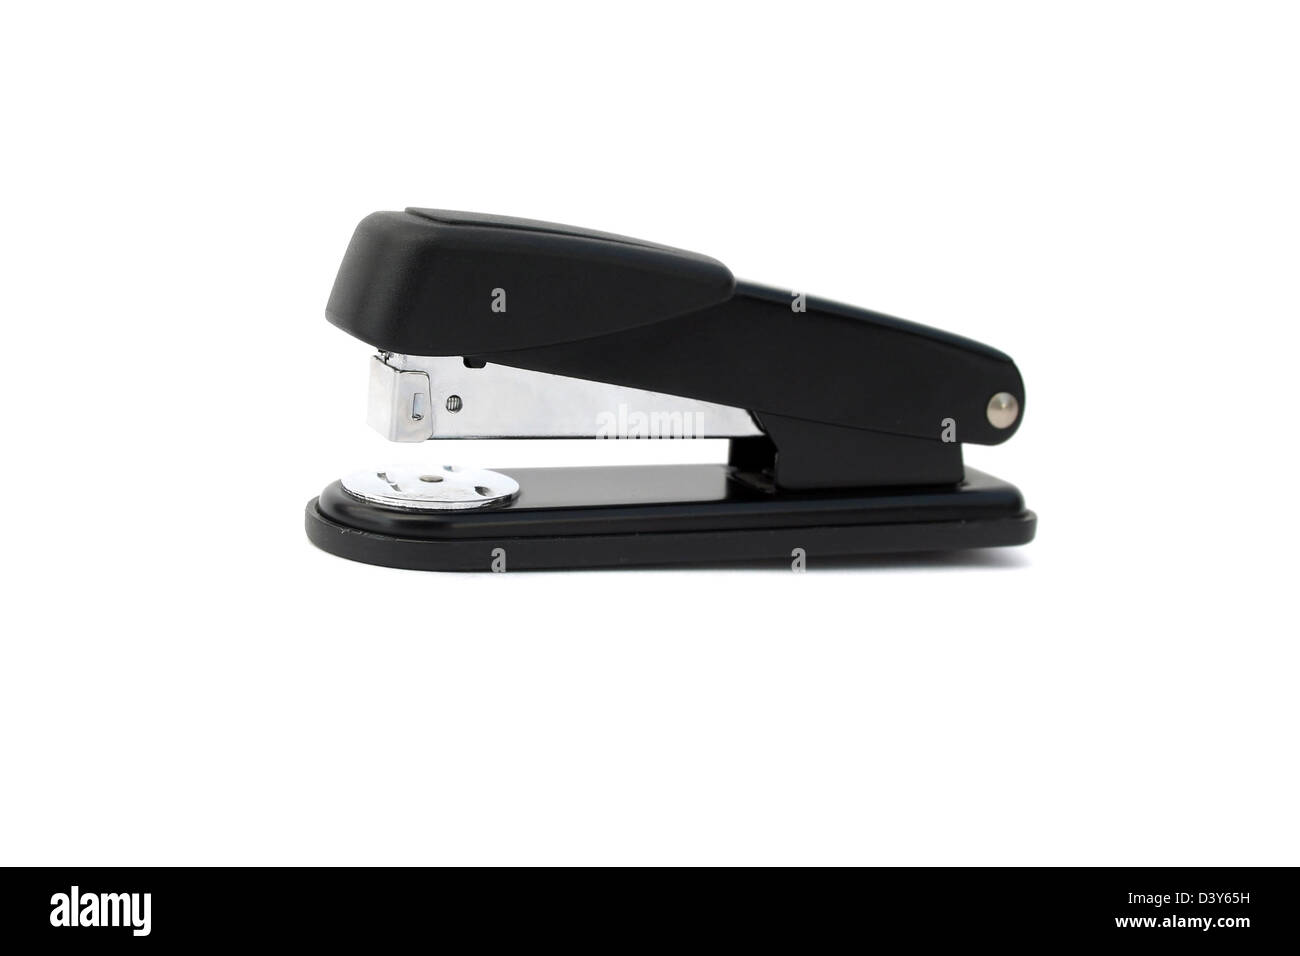 Two Hole Punchers Stapler Isolated On Stock Photo 52615348